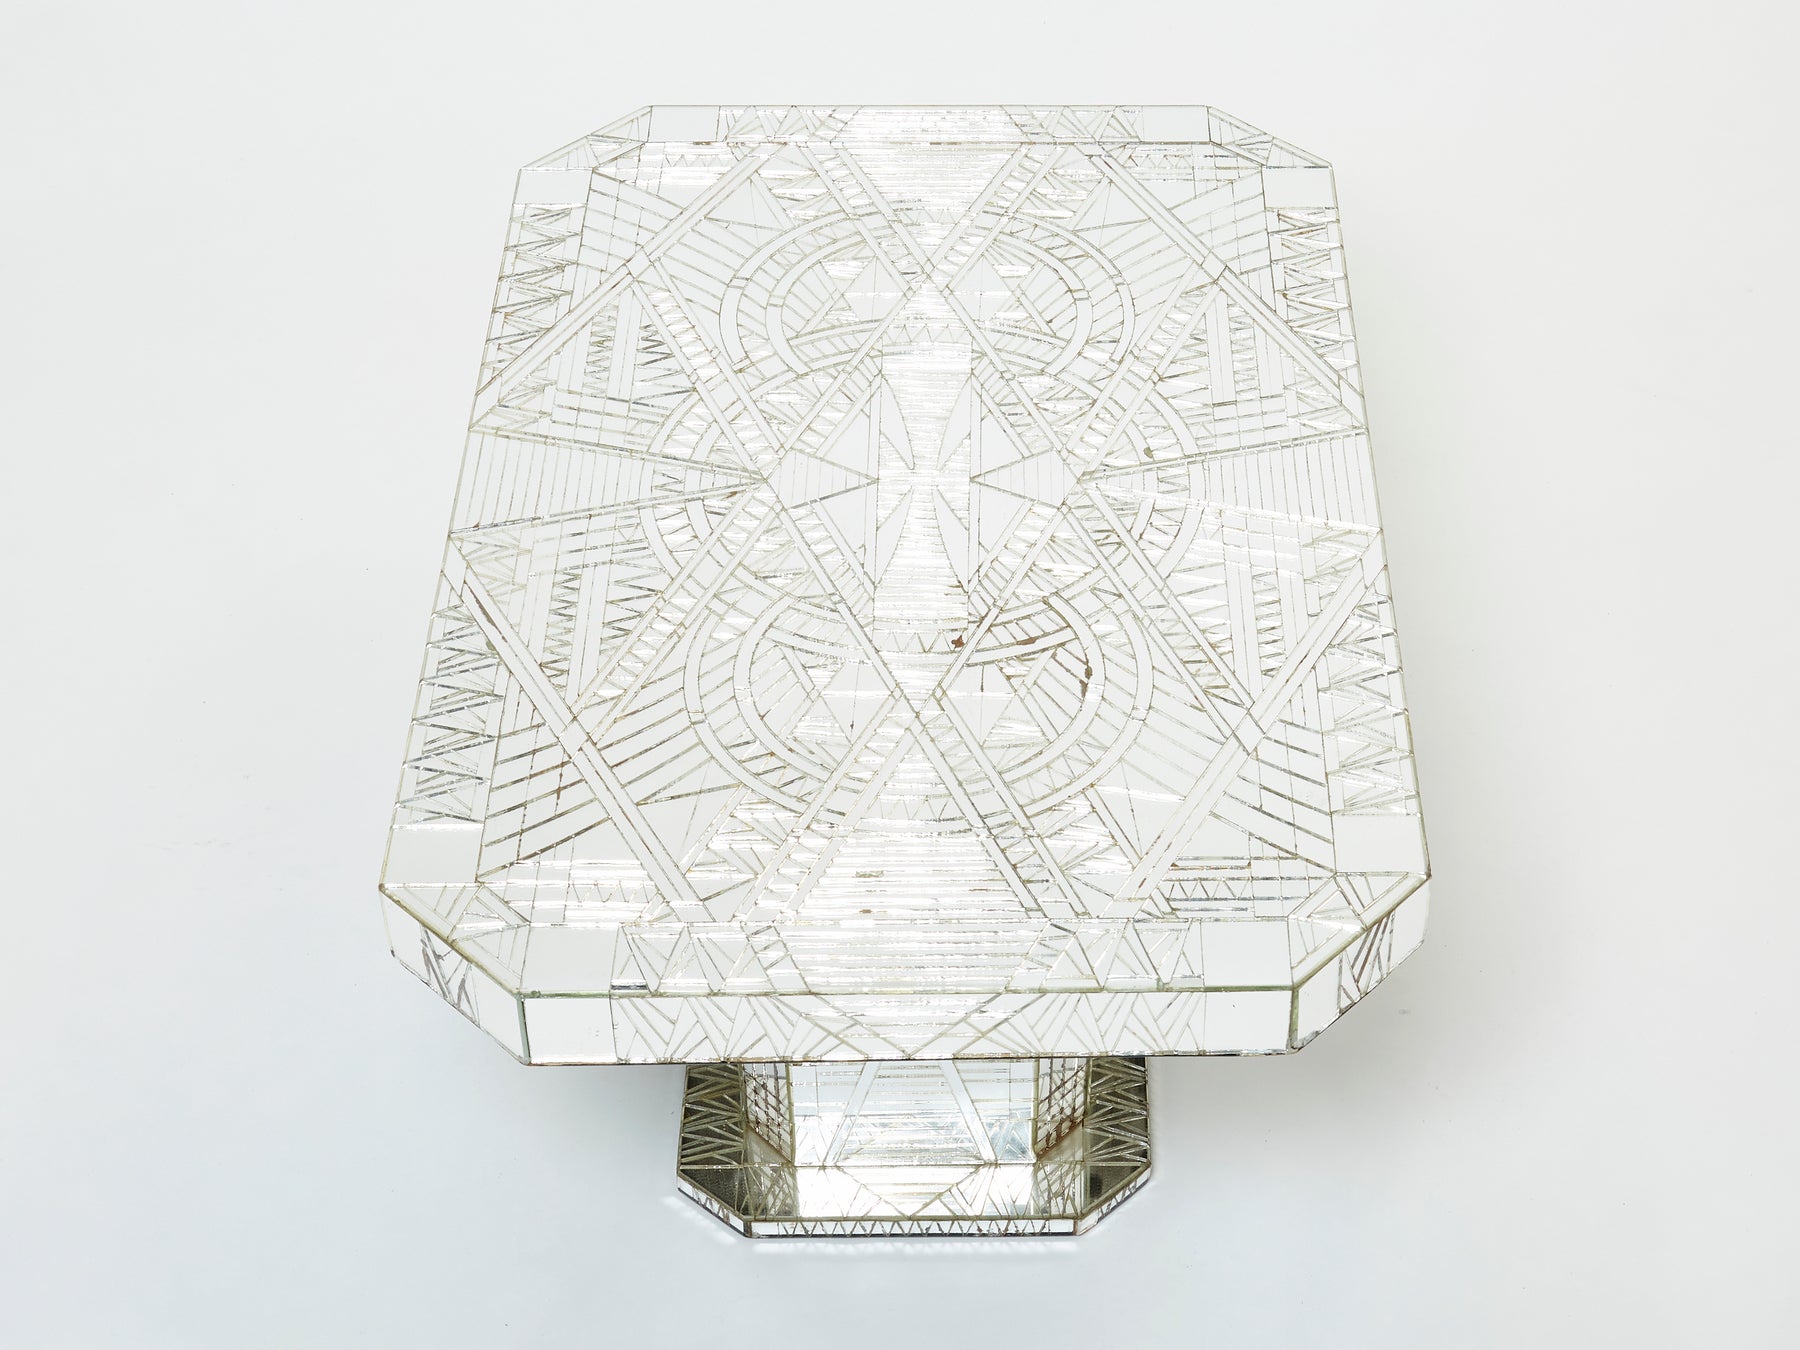 Rare mirror mosaic coffee table by Daniel Clement 1970s